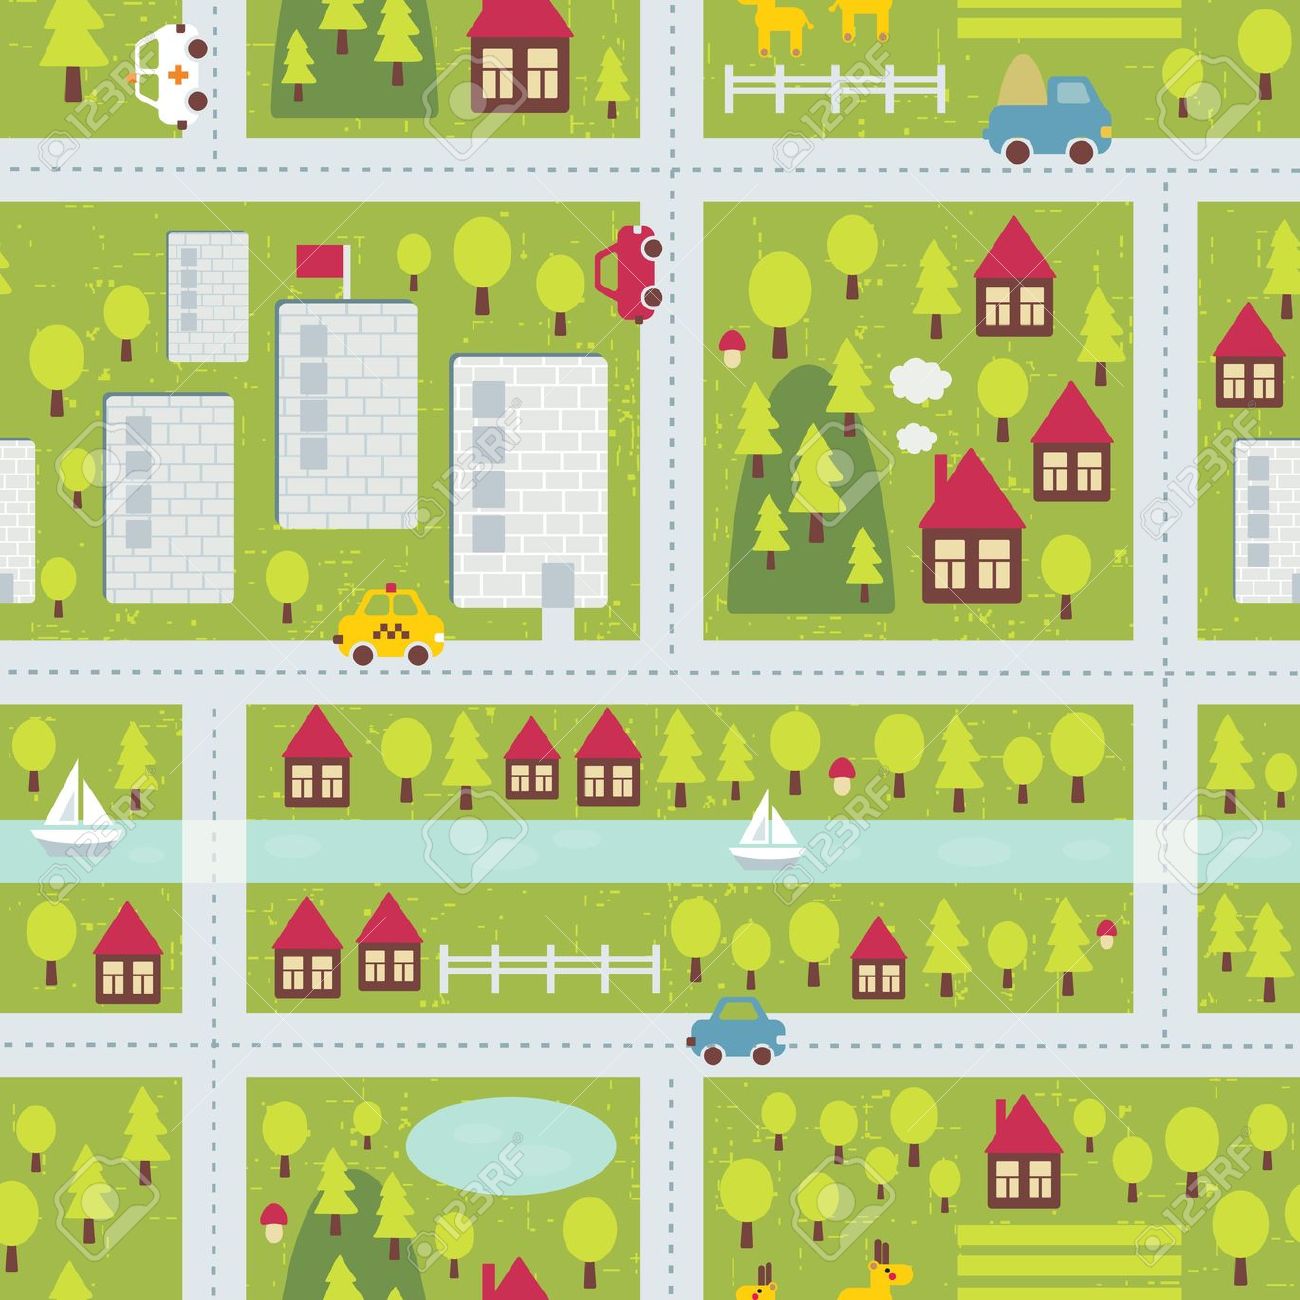 Town map clipart.